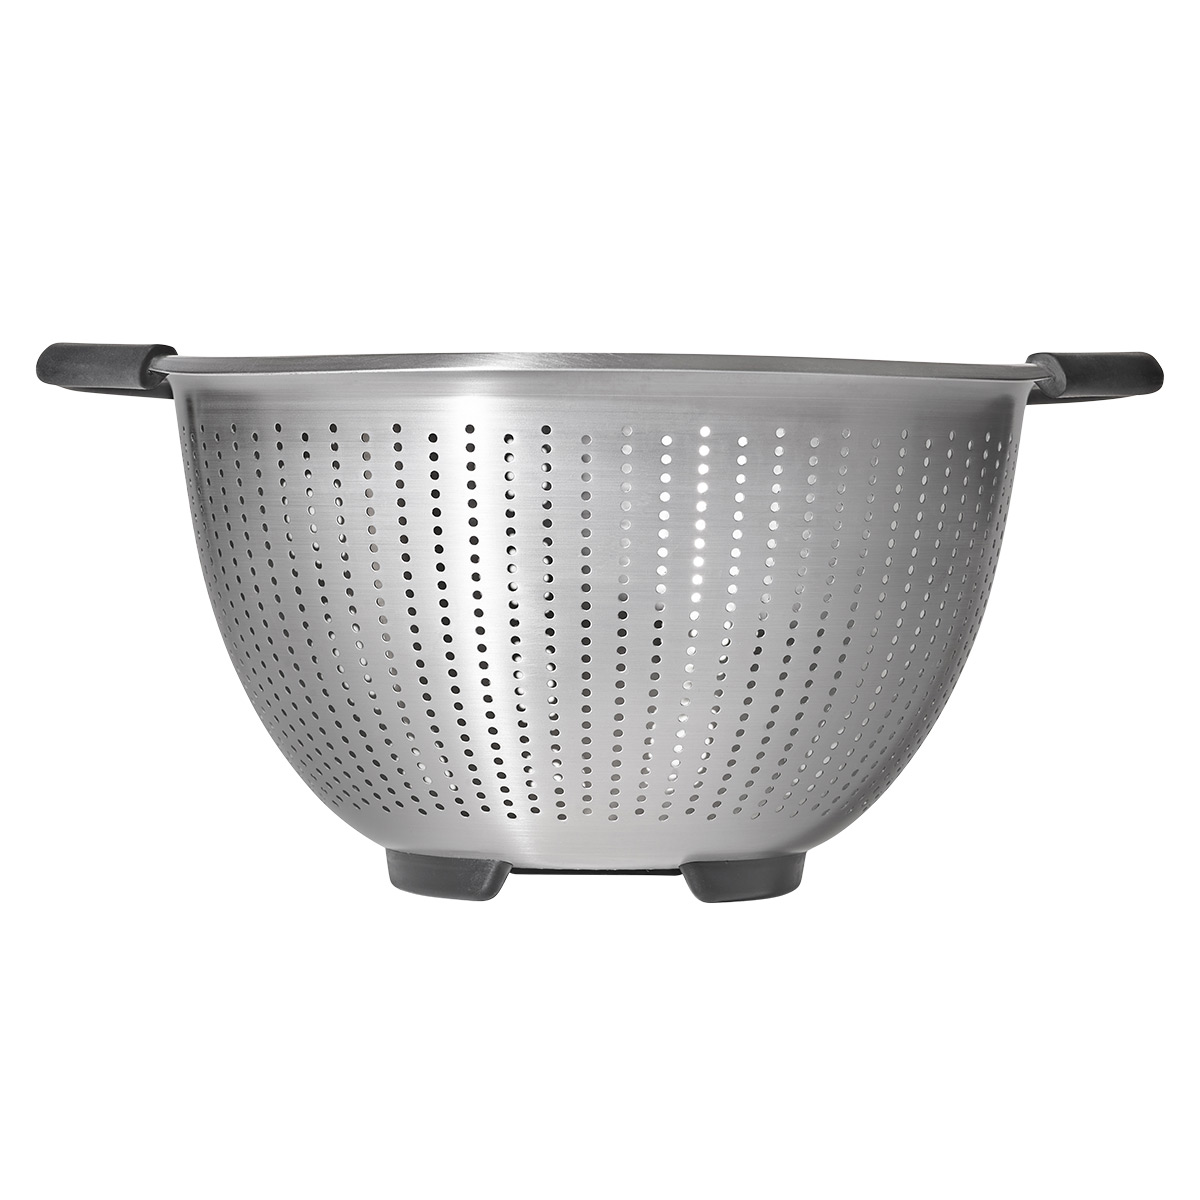 OXO 5 Quart Stainless Steel Colander w/ Silicone Handles - The